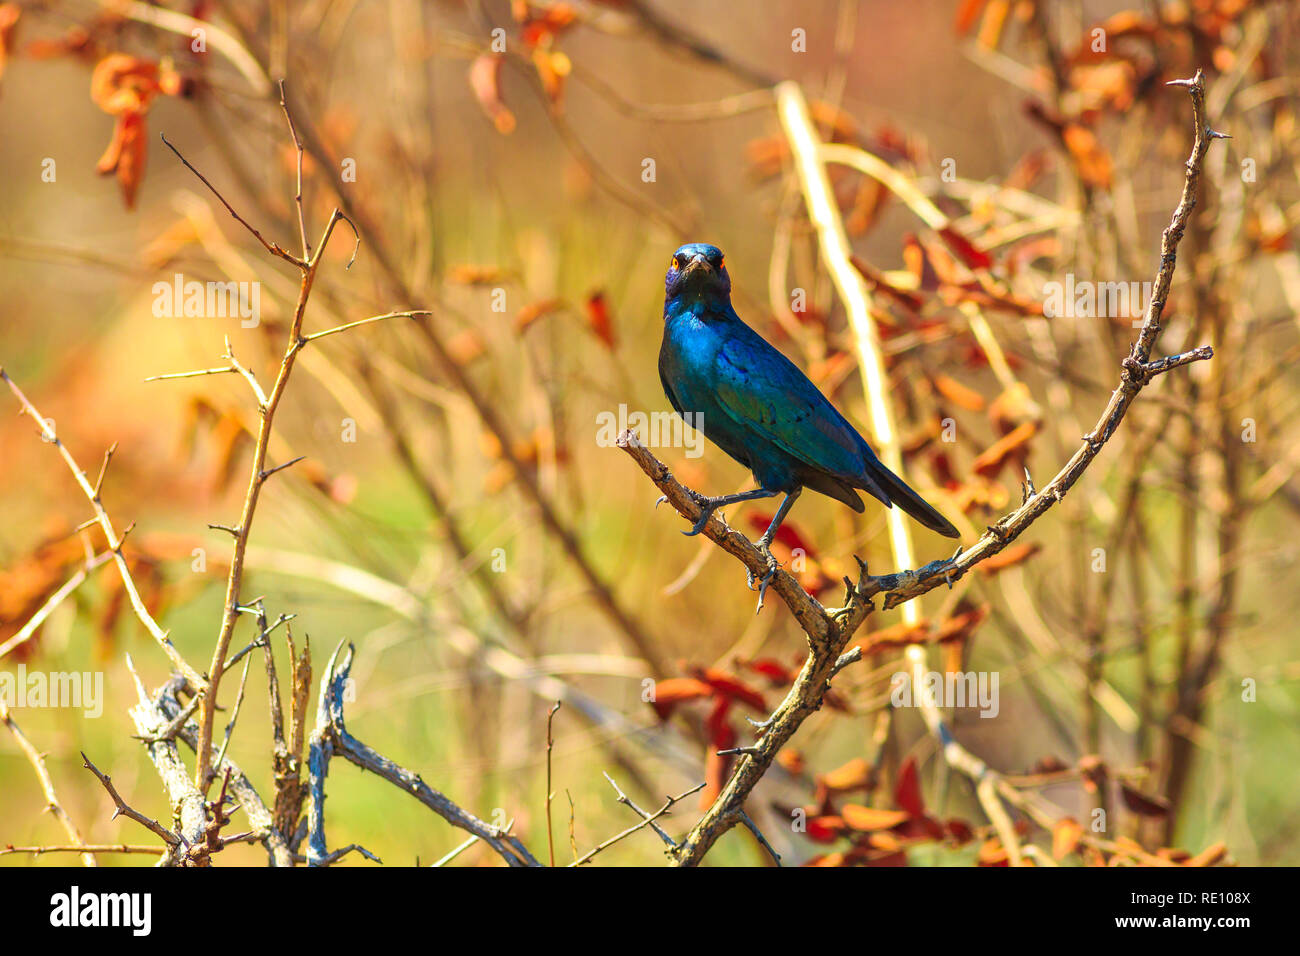 Blue Cape starling on a tree in Kruger National Park, South Africa. Red-shouldered glossy-starling or Cape glossy starling. Lamprotornis nitens species. Stock Photo